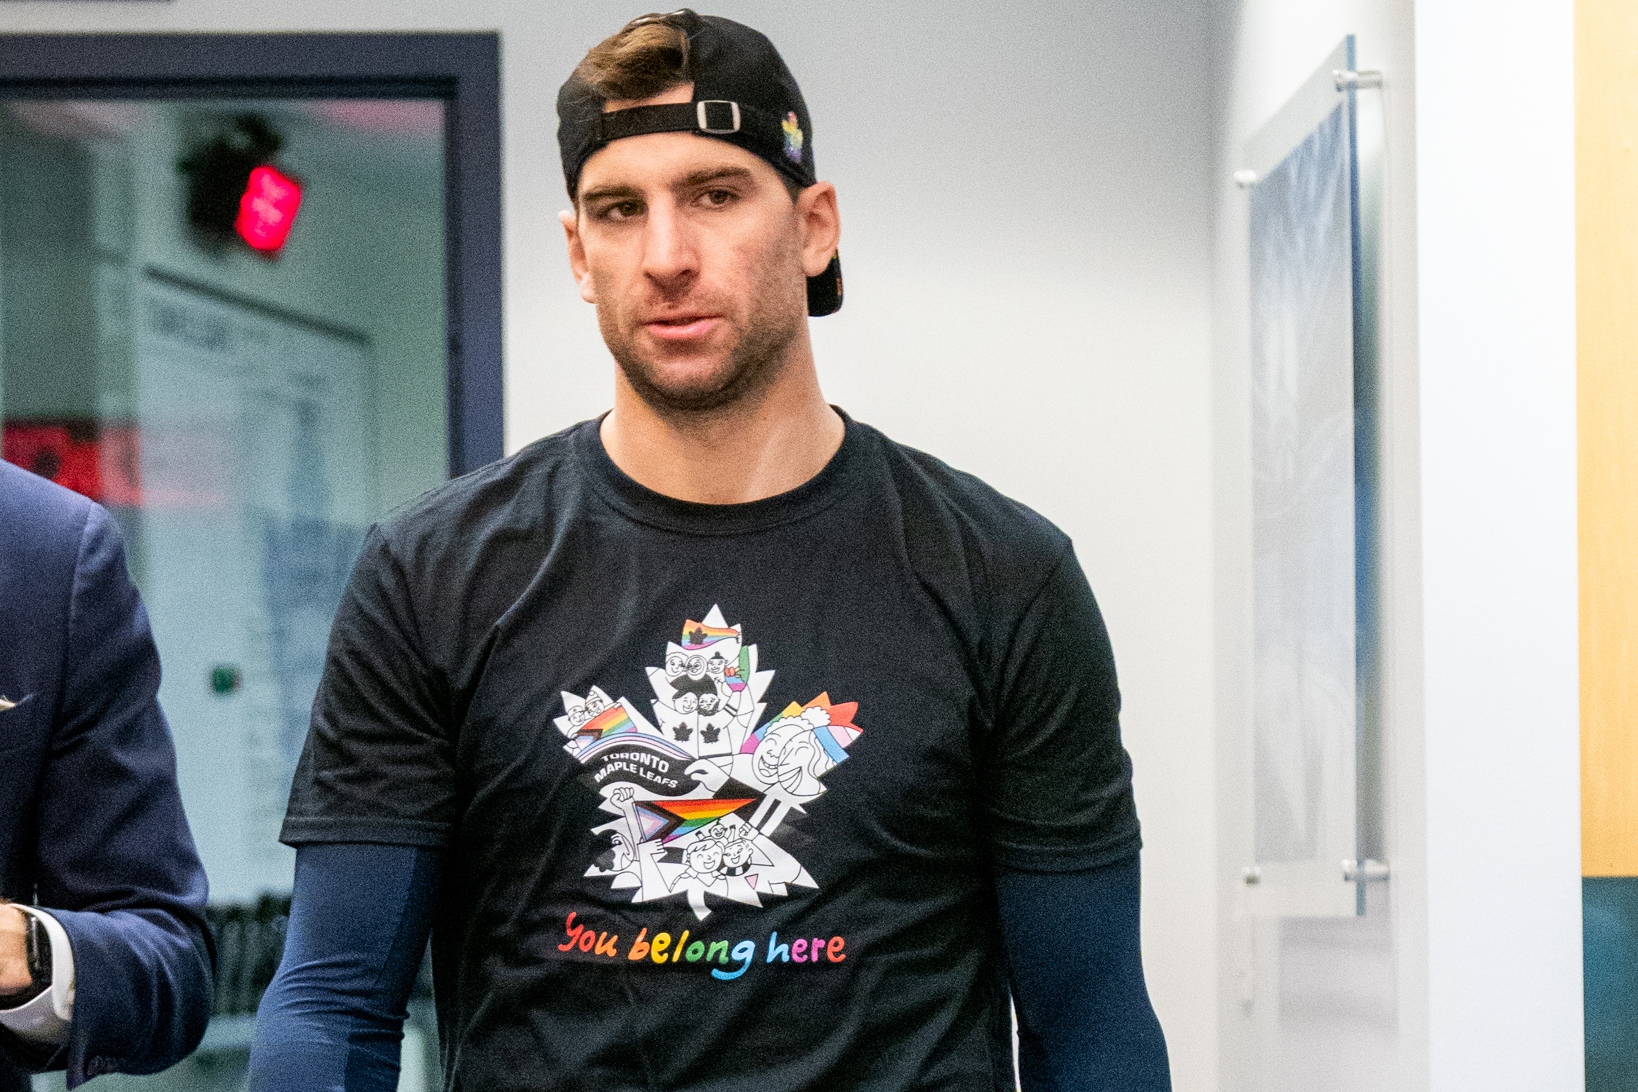 Toronto Maple Leafs: The Importance of Pride Appearance